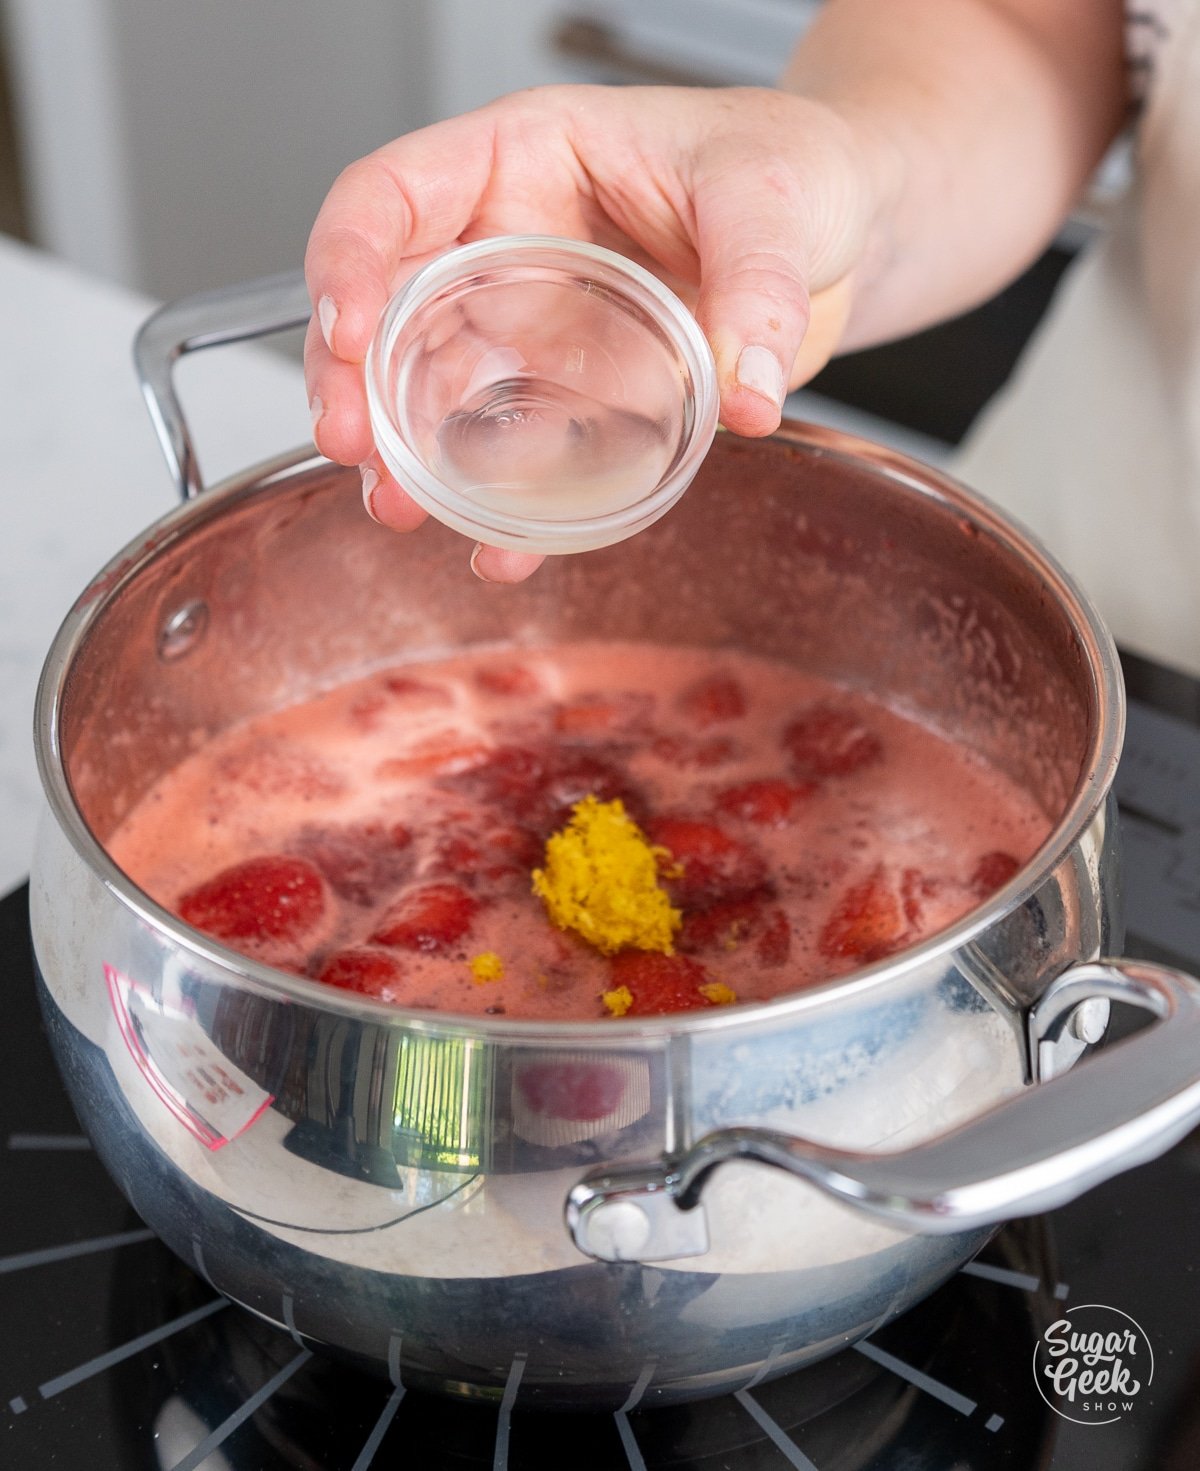 hand adding lemon extract to a pot with cooking strawberries and lemon zest.